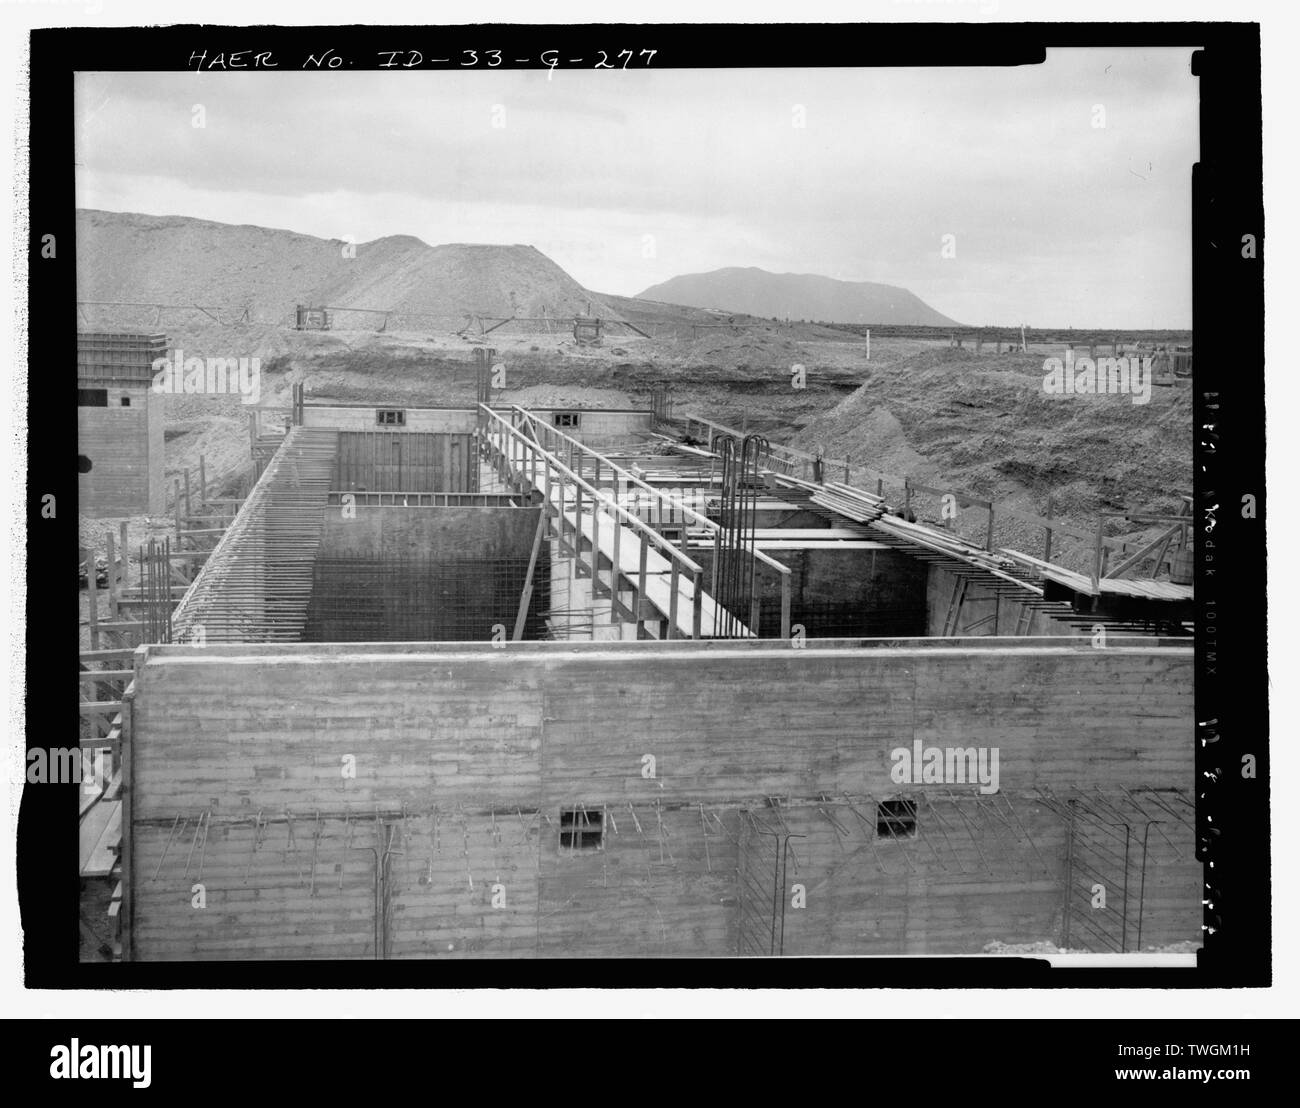 RETENTION BASIN, ASSOCIATED WITH PUMP HOUSE, TRA-636. TWO REINFORCED CONCRETE BASINS ARE ADJACENT TO ONE ANOTHER. CAMERA FACING SOUTH. INL NEGATIVE NO. 2397A.; Unknown Photographer, 5-13-1951 - Idaho National Engineering Laboratory, Test Reactor Area, Materials and Engineering Test Reactors, Scoville, Butte County, ID Stock Photo